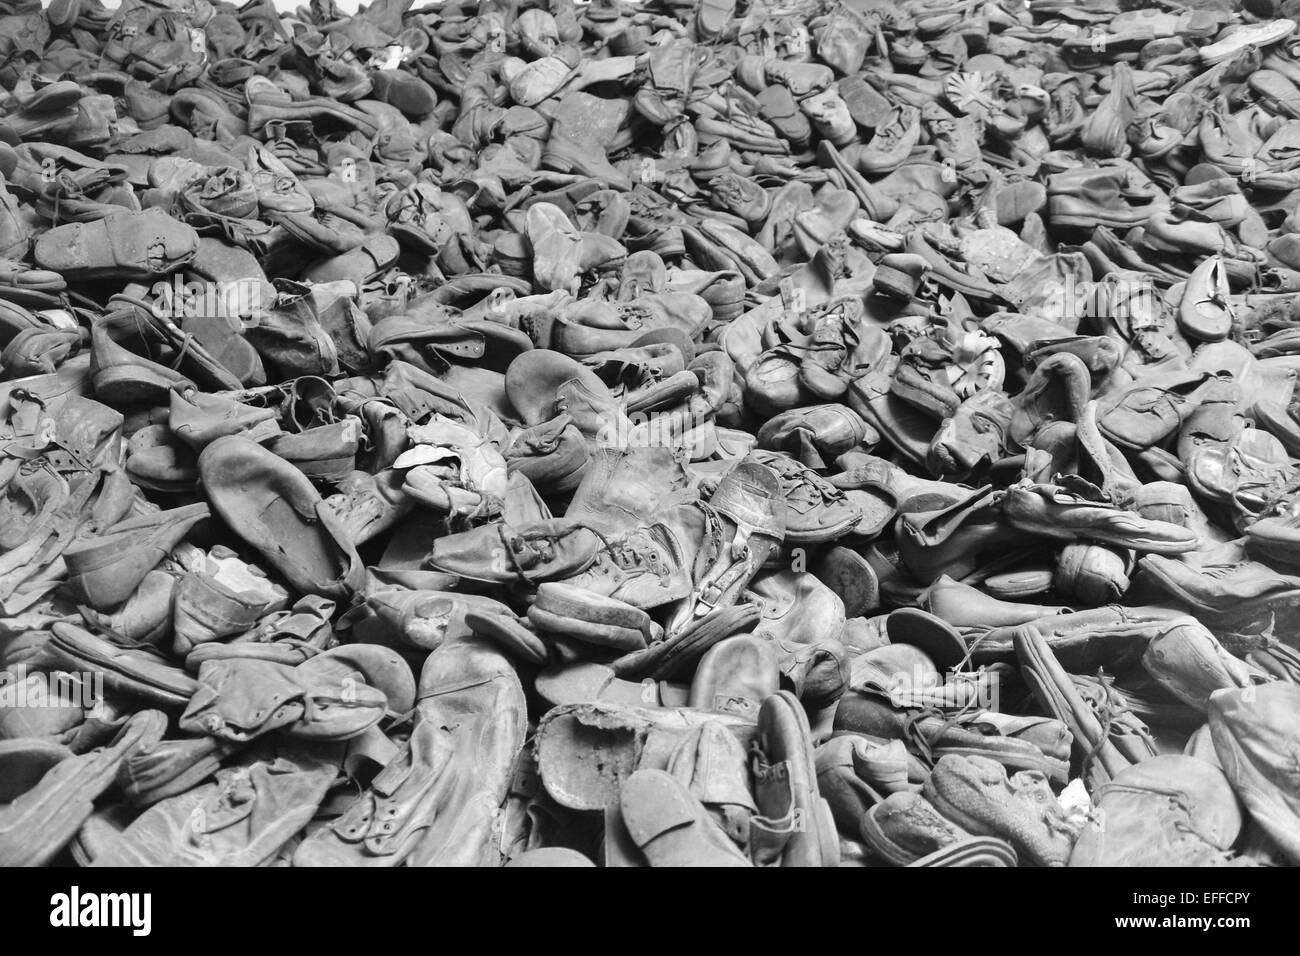 Shoes of the people deported in Auschwitz concentration camp, Poland Stock Photo